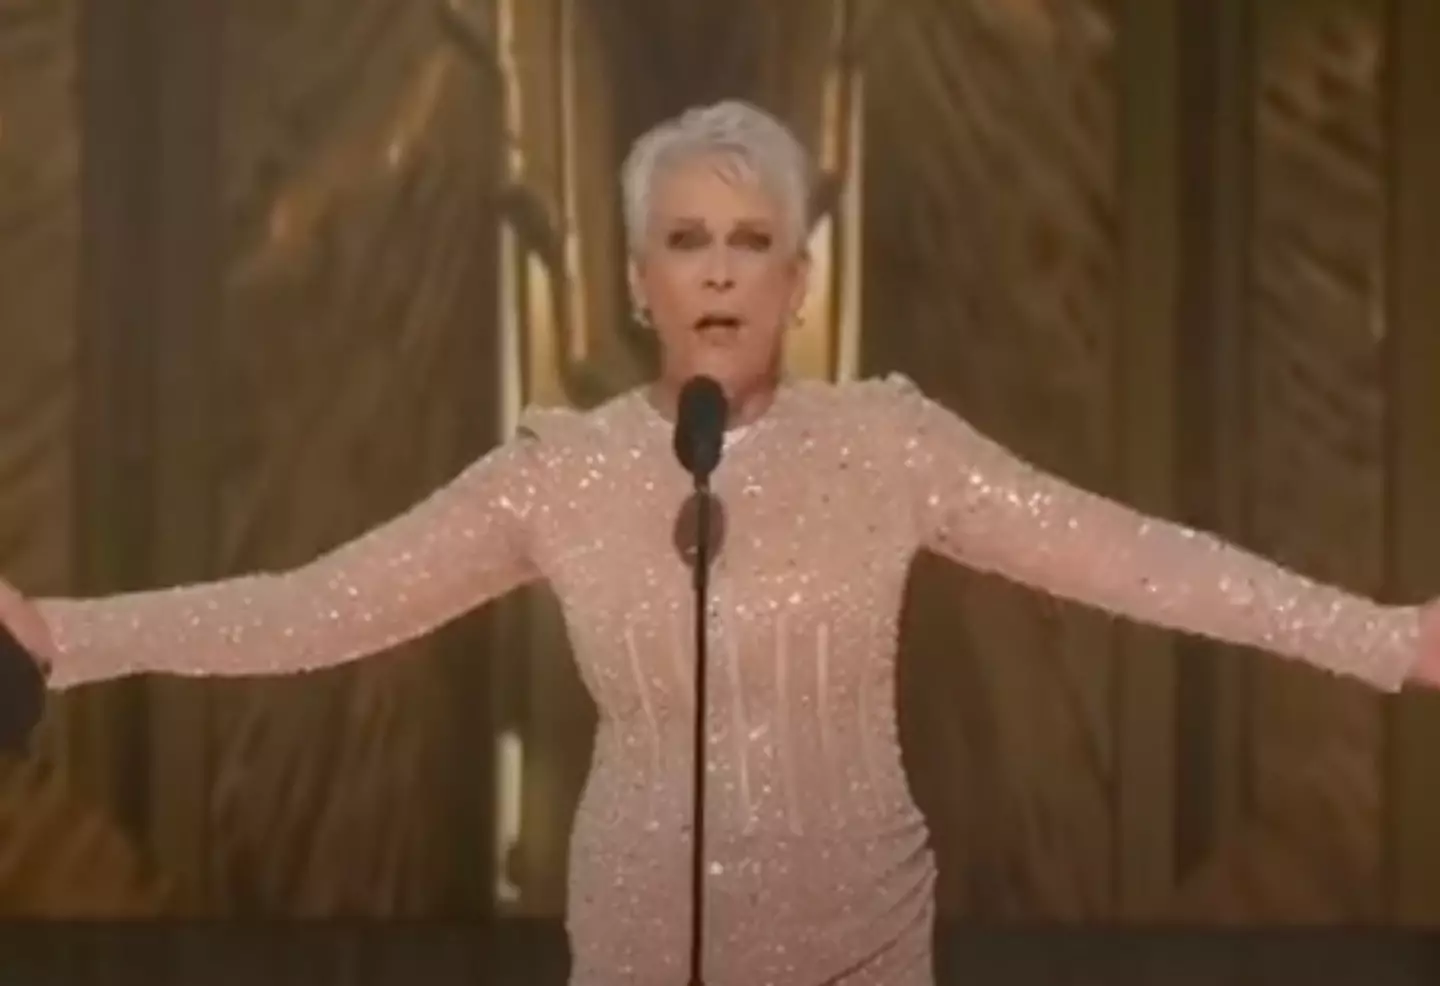 Jamie Lee Curtis won the Oscar for Best Supporting Actress.